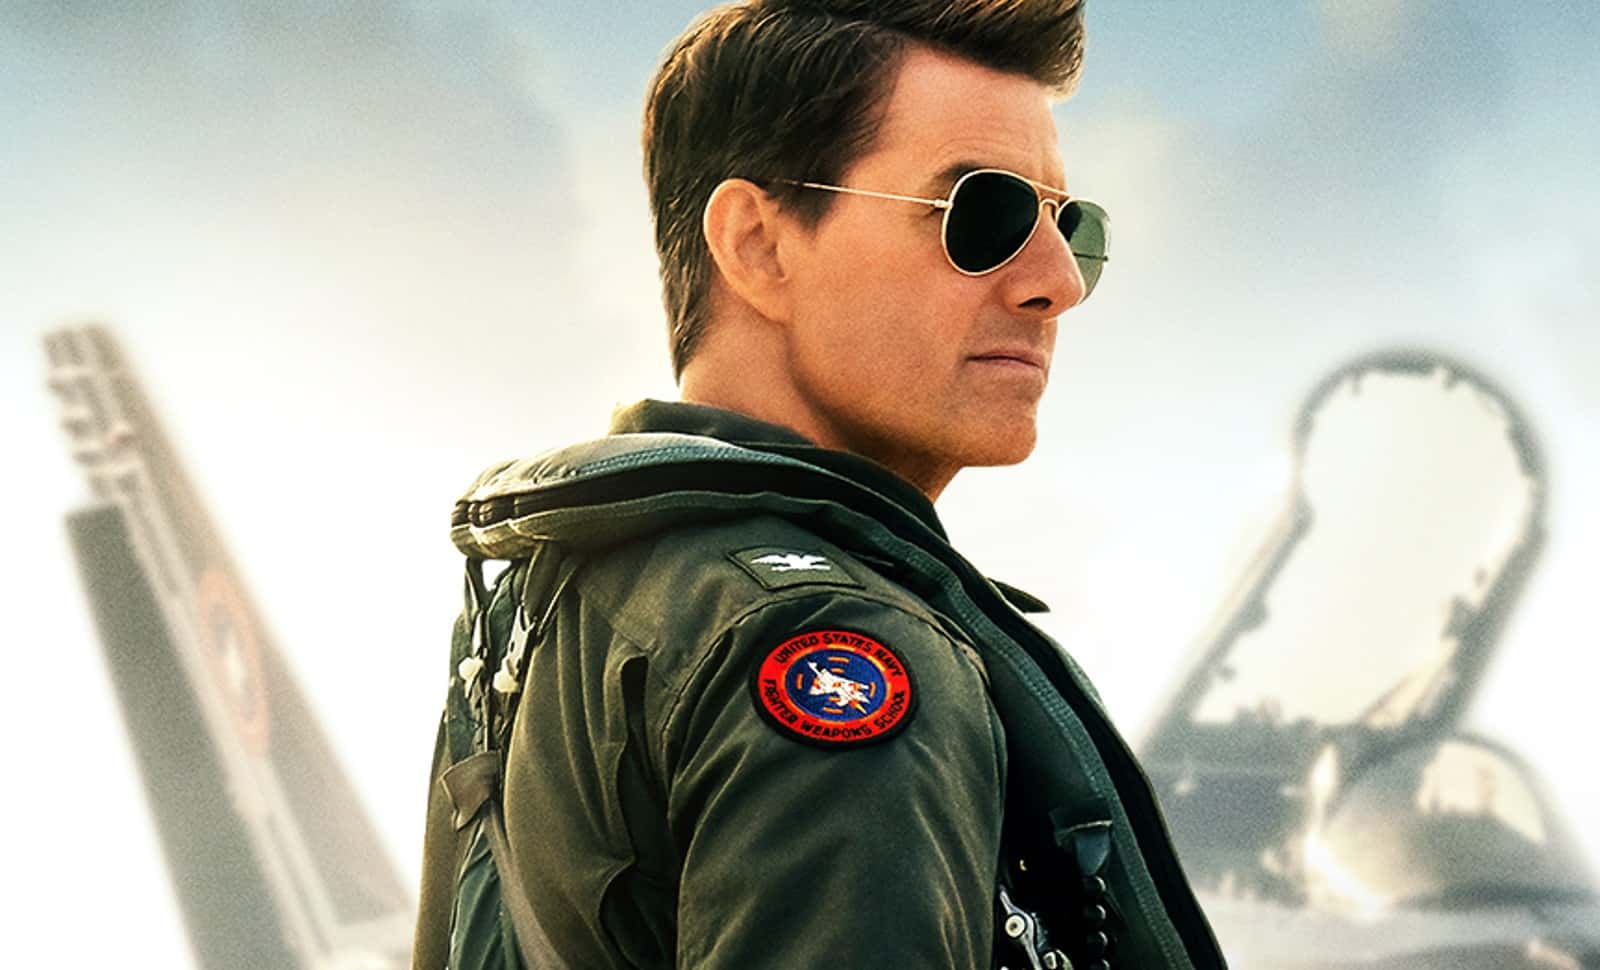 How Old Was Tom Cruise at The Time of The Top Gun Movie?